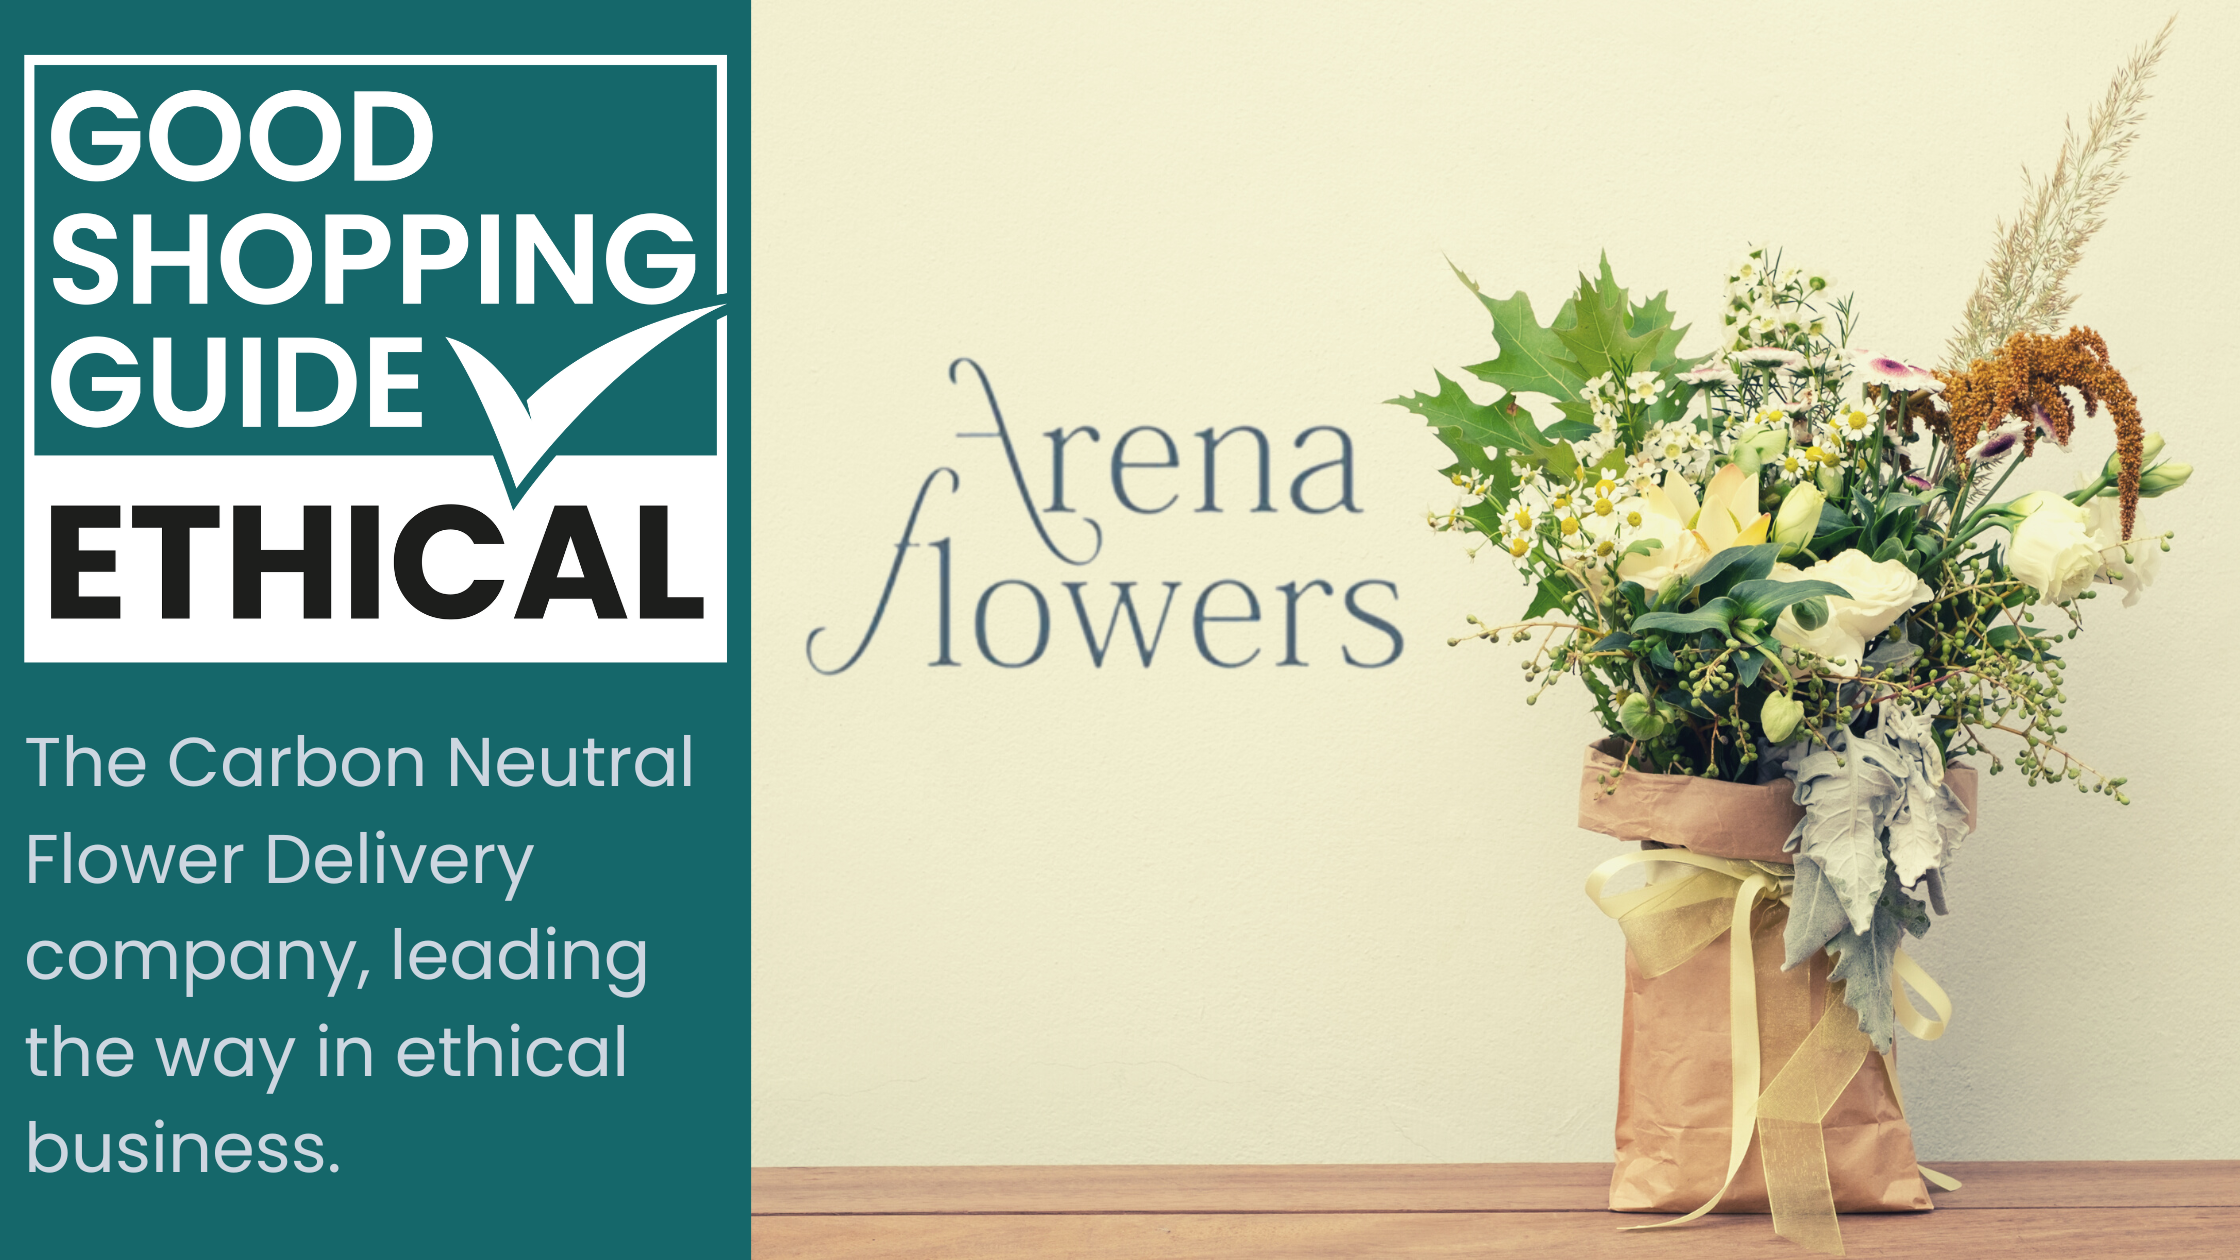 Arena Flowers, the Carbon Neutral Flower Delivery company, leading the way in ethical business.